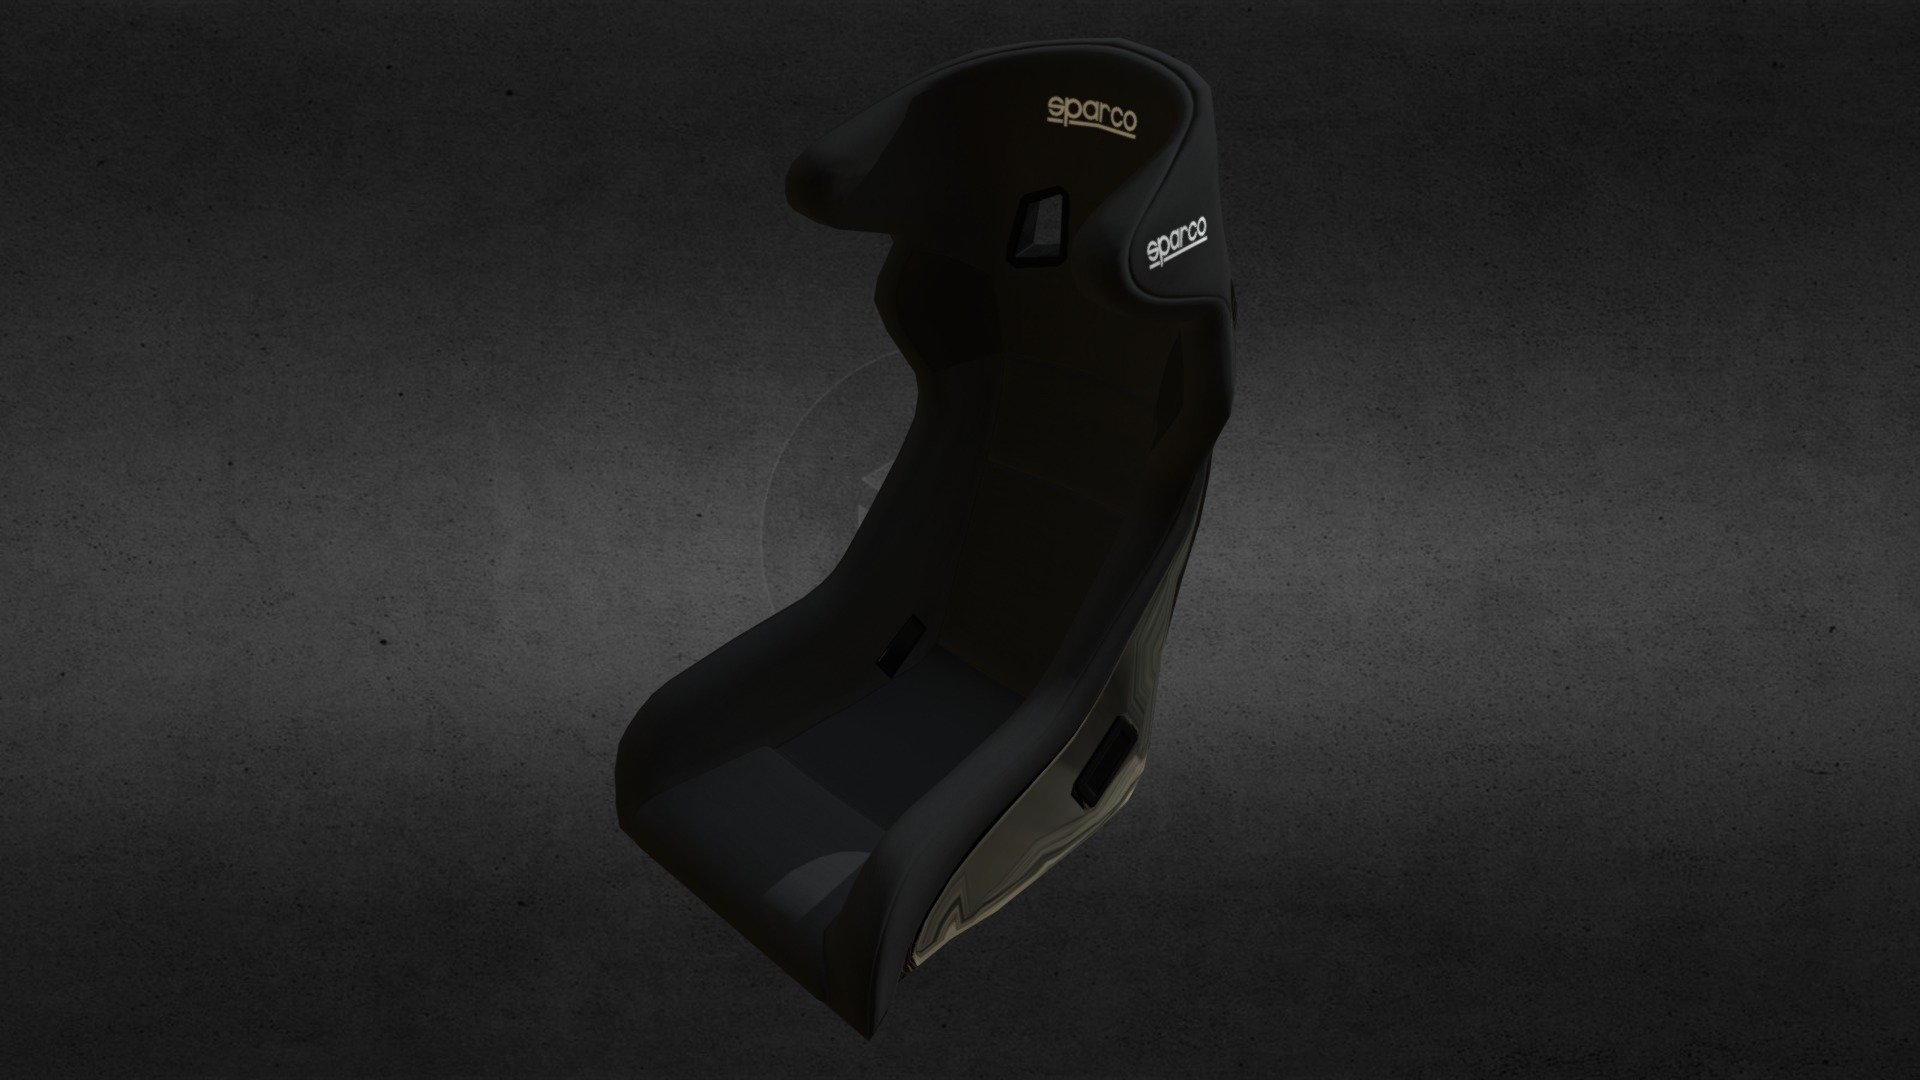 Game ready 3d model of racing bucket seat Sparco Circuit. The model uses 4k materials such as normal map generated from HP model. Also includes Specular map to add visual effect of polyshed composite and light reflection of brand logo. Base color texture adds fabric effect with white brand logos and back painted back part of the bucket seat 3d model